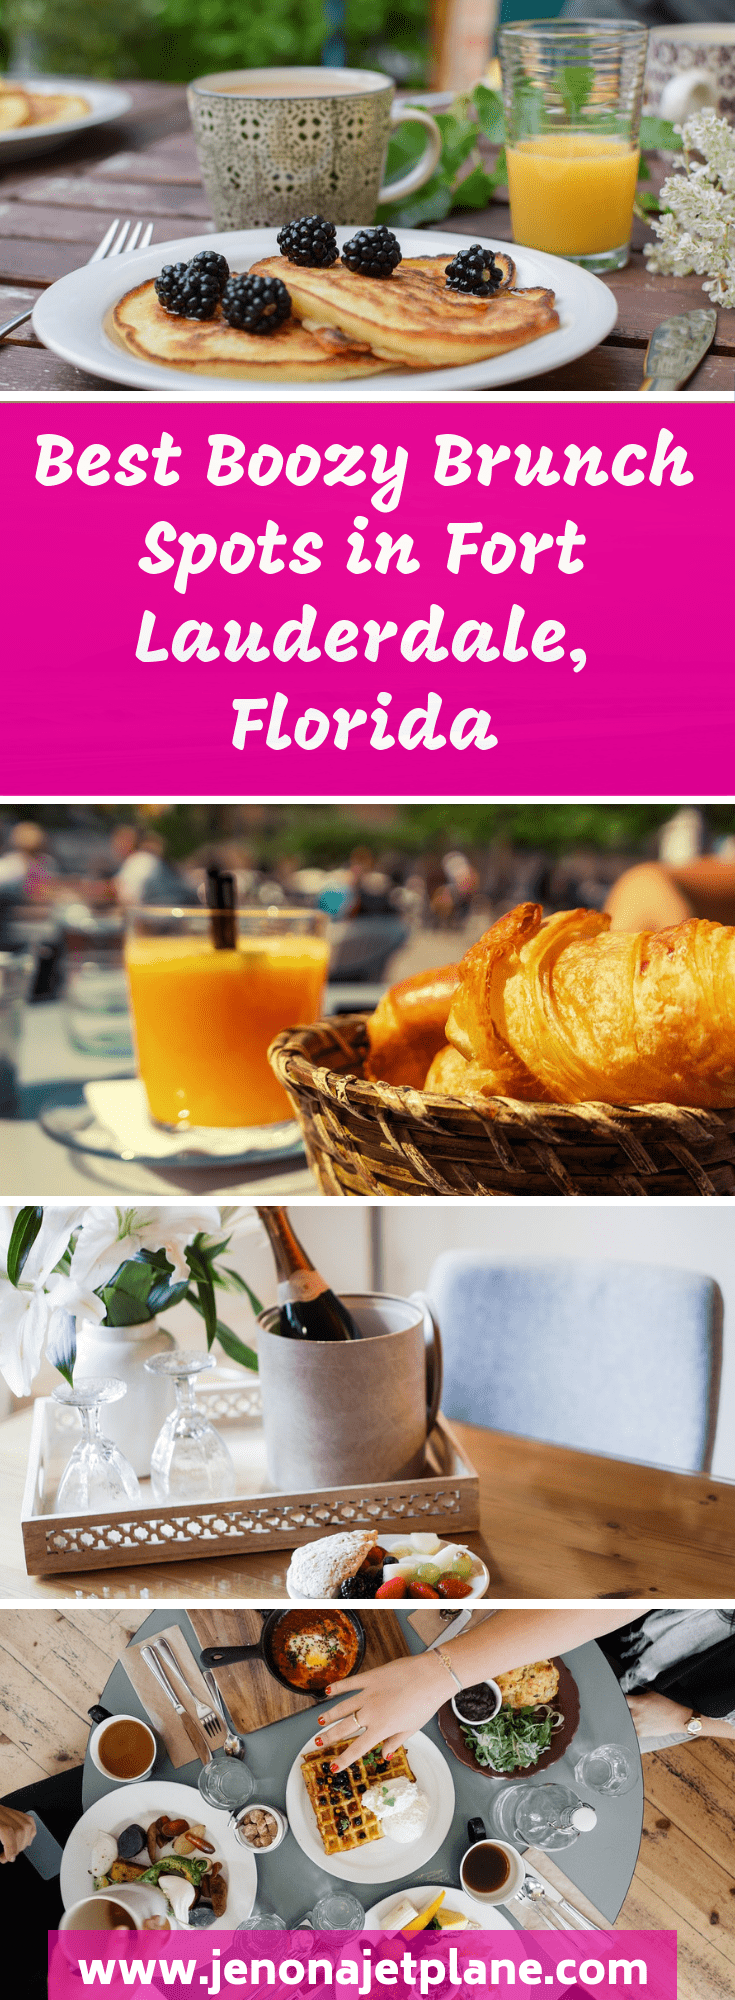 Ready to get your brunch on? Downtown Fort Lauderdale has an impressive brunch scene, with restaurants serving bottomless mimosas on Saturdays and Sundays. Celebrate your Fort Lauderdale vacation with a mimosa at these top spots! Don't miss the best brunch deals in Fort Lauderdale, Florida. Save to your travel board for future reference. #fortlauderdale #brunchspots #travelreviews #floridatravel #visitflorida